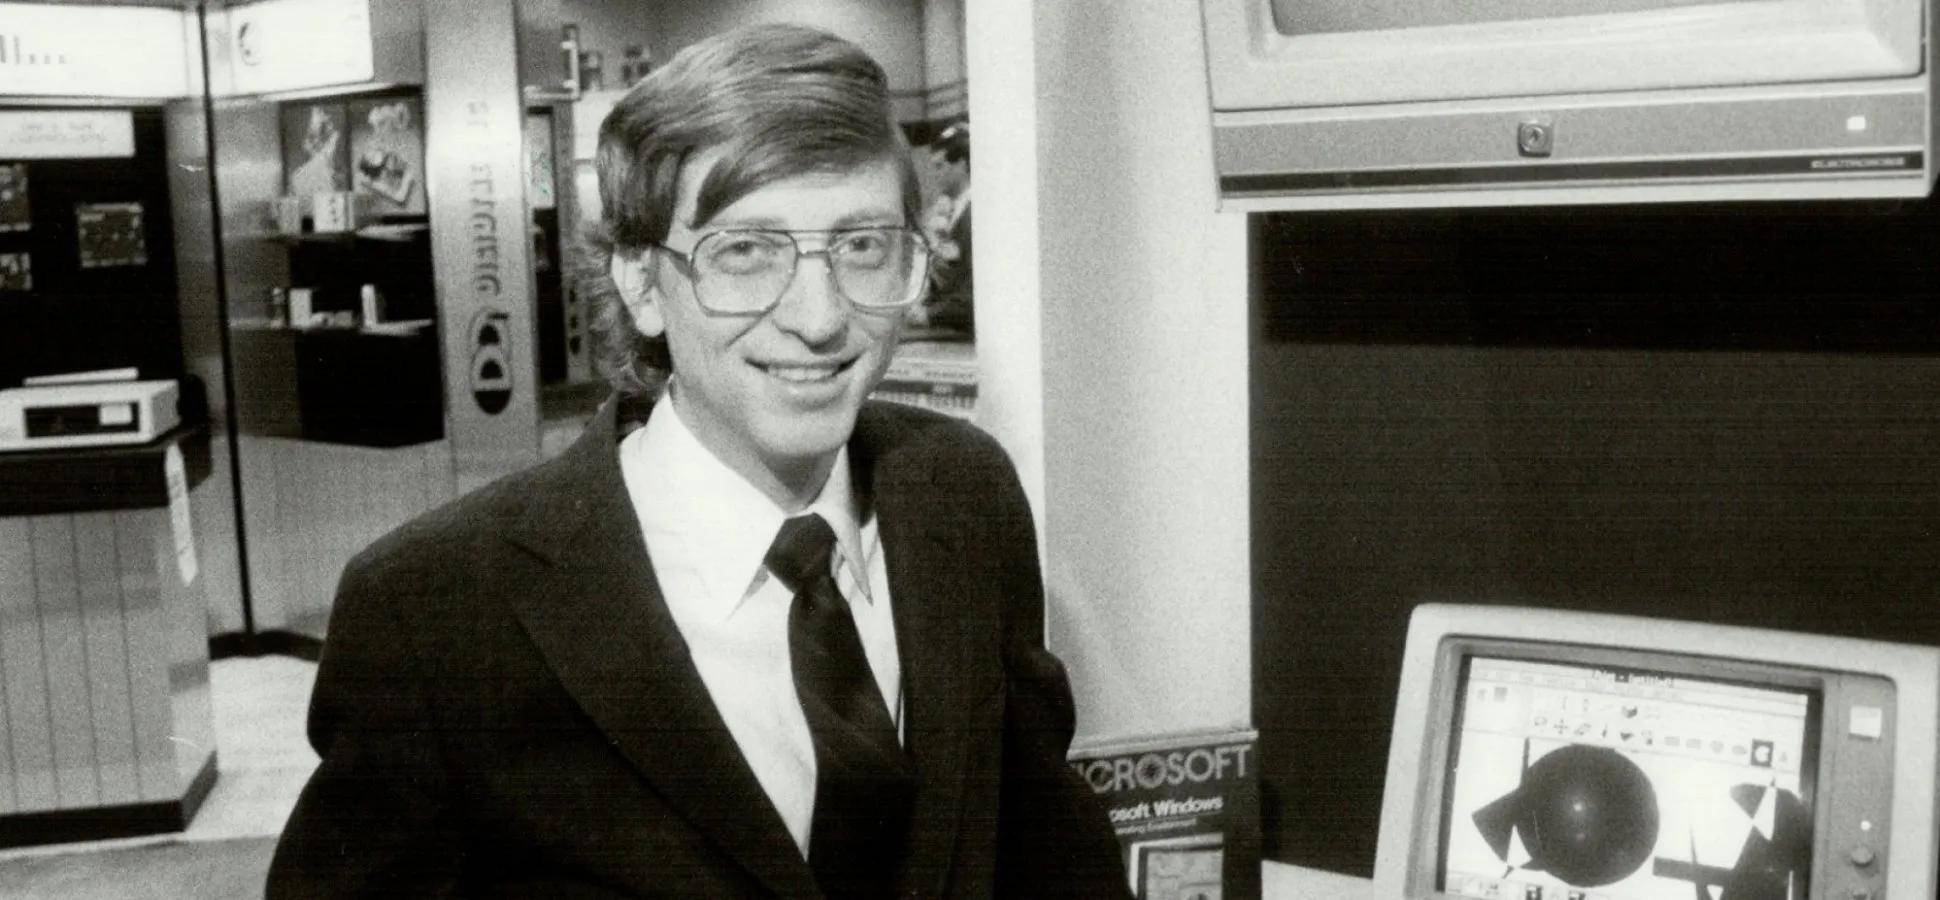 bill gates stole from hewlett packard - Who did Bill Gates steal the Windows idea from